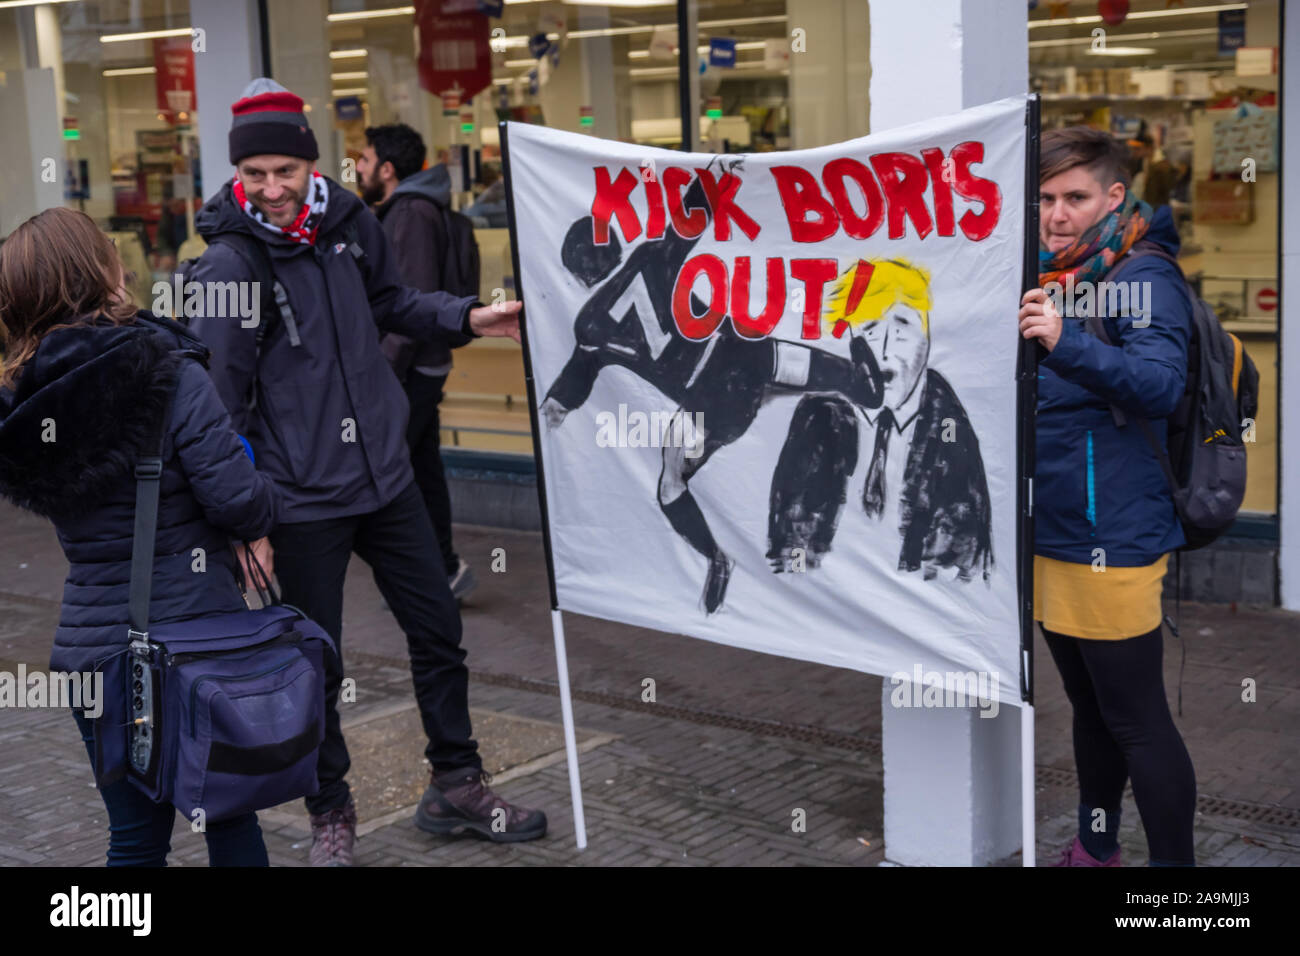 London, UK. 16th November 2019. KICK BORIS OUT banner. Protesters from FCKBoris in orange knitted hats walk through Uxbridge shopping centre handing out fliers urging everyone to register and vote against Boris Johnson and kick him out for his racist, elitist politics. They marched with a sound system on a bus to Brunel University to persuade students. Johnson had a majority of just over 5 thousand in 2017 and Labour candidate Ali Milani has strong hopes of beating him and the other 10 candidates. Peter Marshall/Alamy Live News Stock Photo